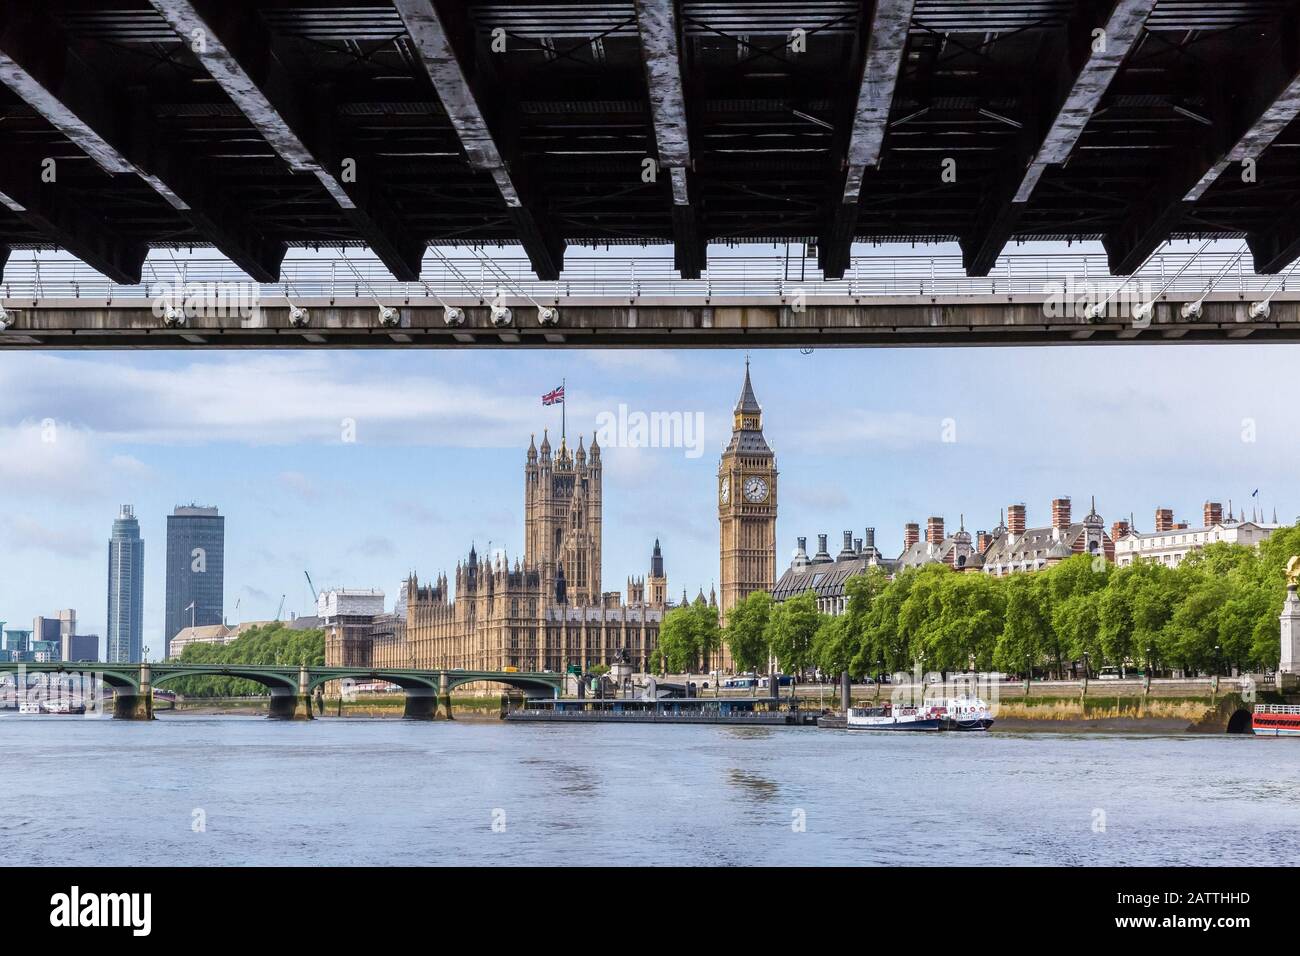 The Palace of Westminster on the River Thames, including the Clock Tower, Big Ben, London, England, United Kingdom Stock Photo